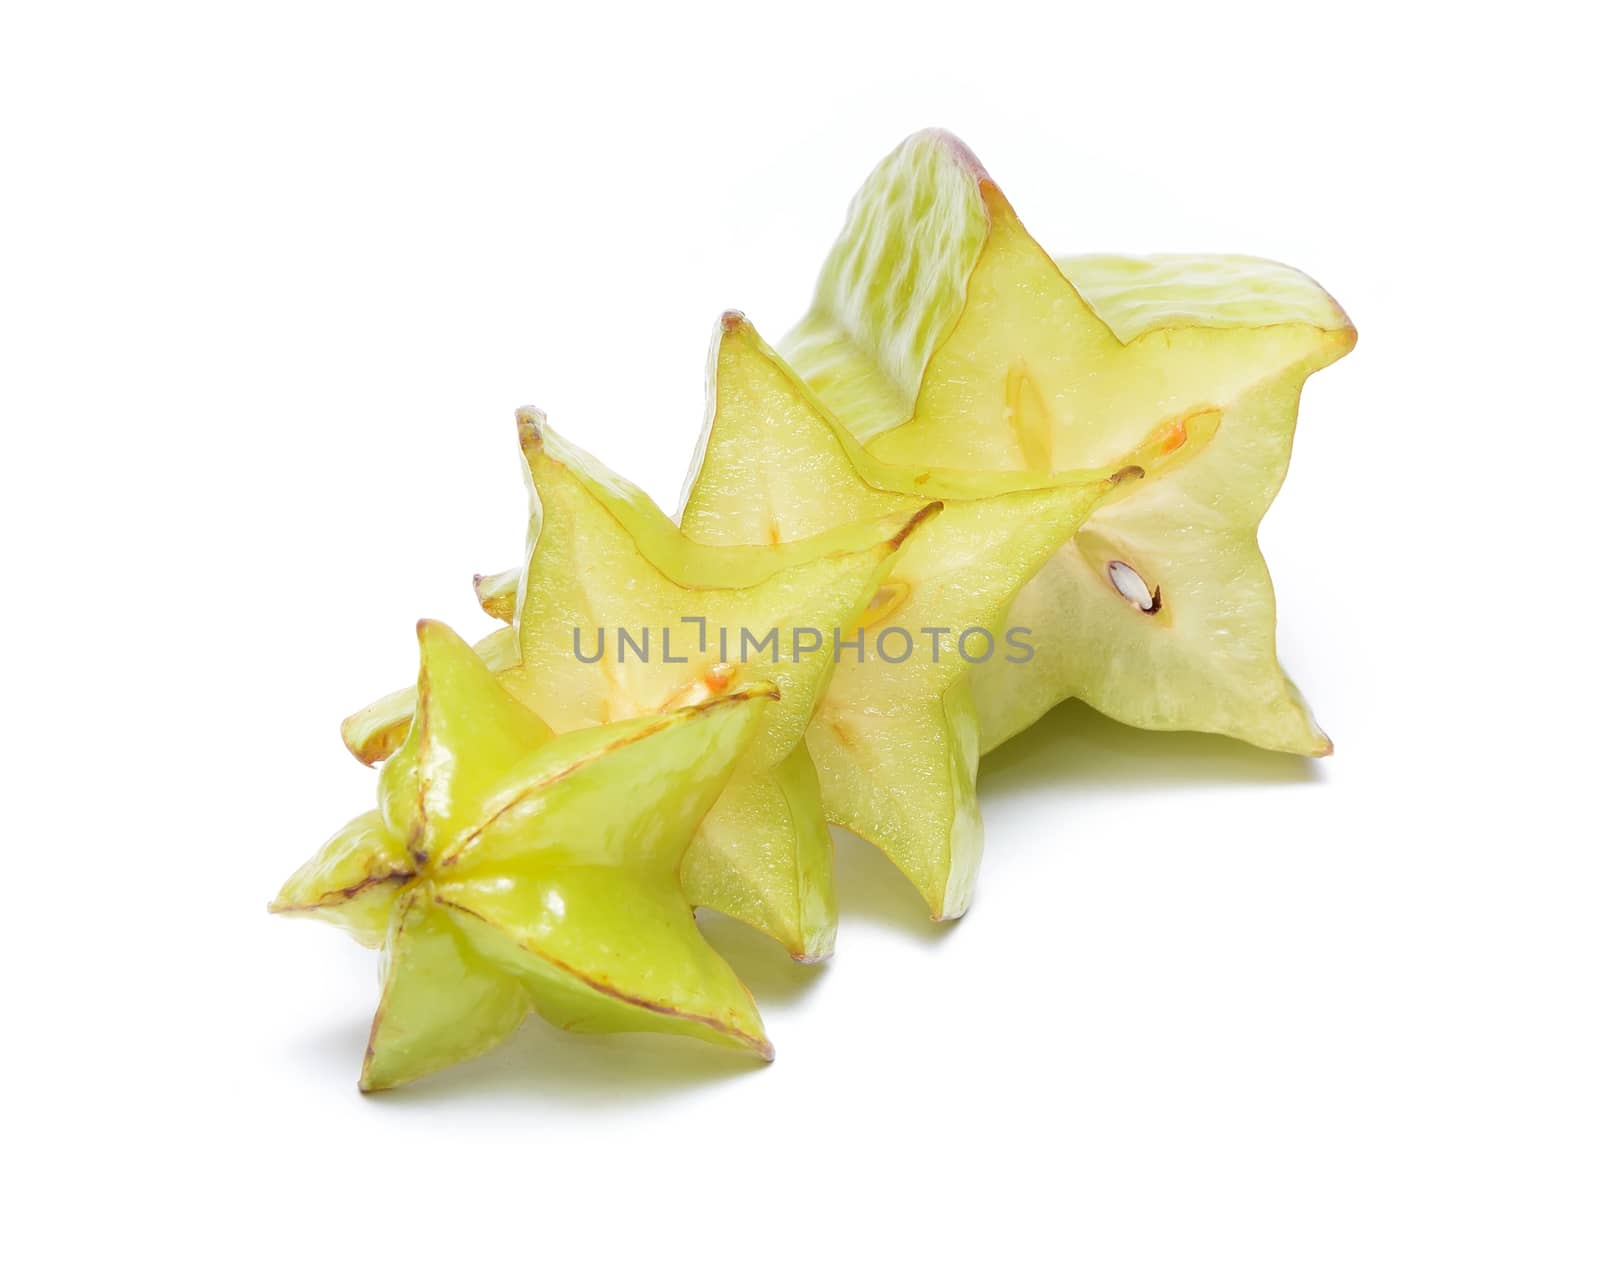 Unripped star fruit - carambola isolated on white background by comet